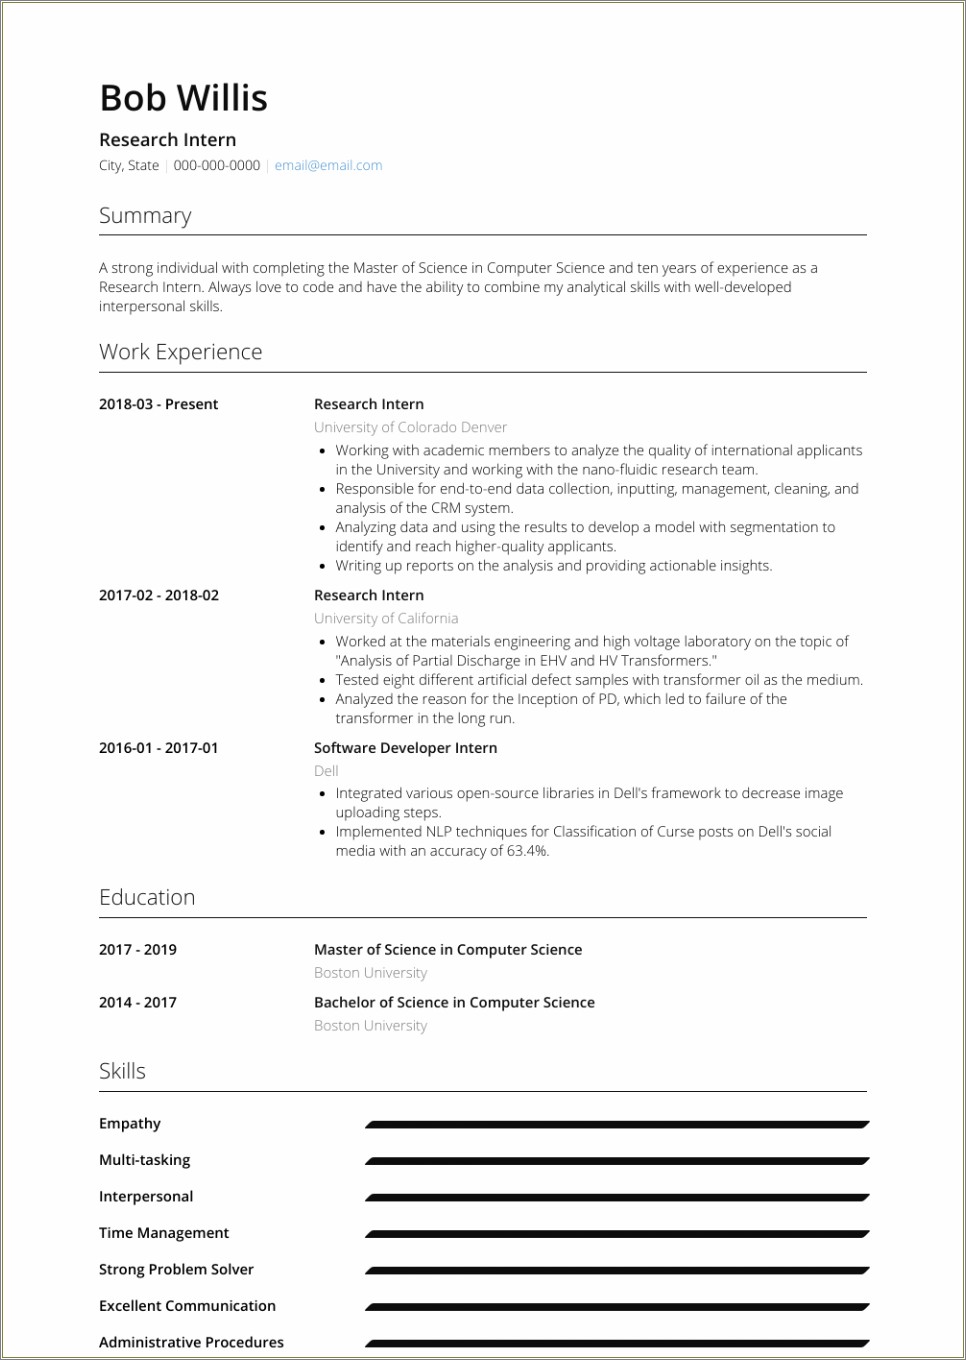 Fresh Computer Graduate Resume With No Experience